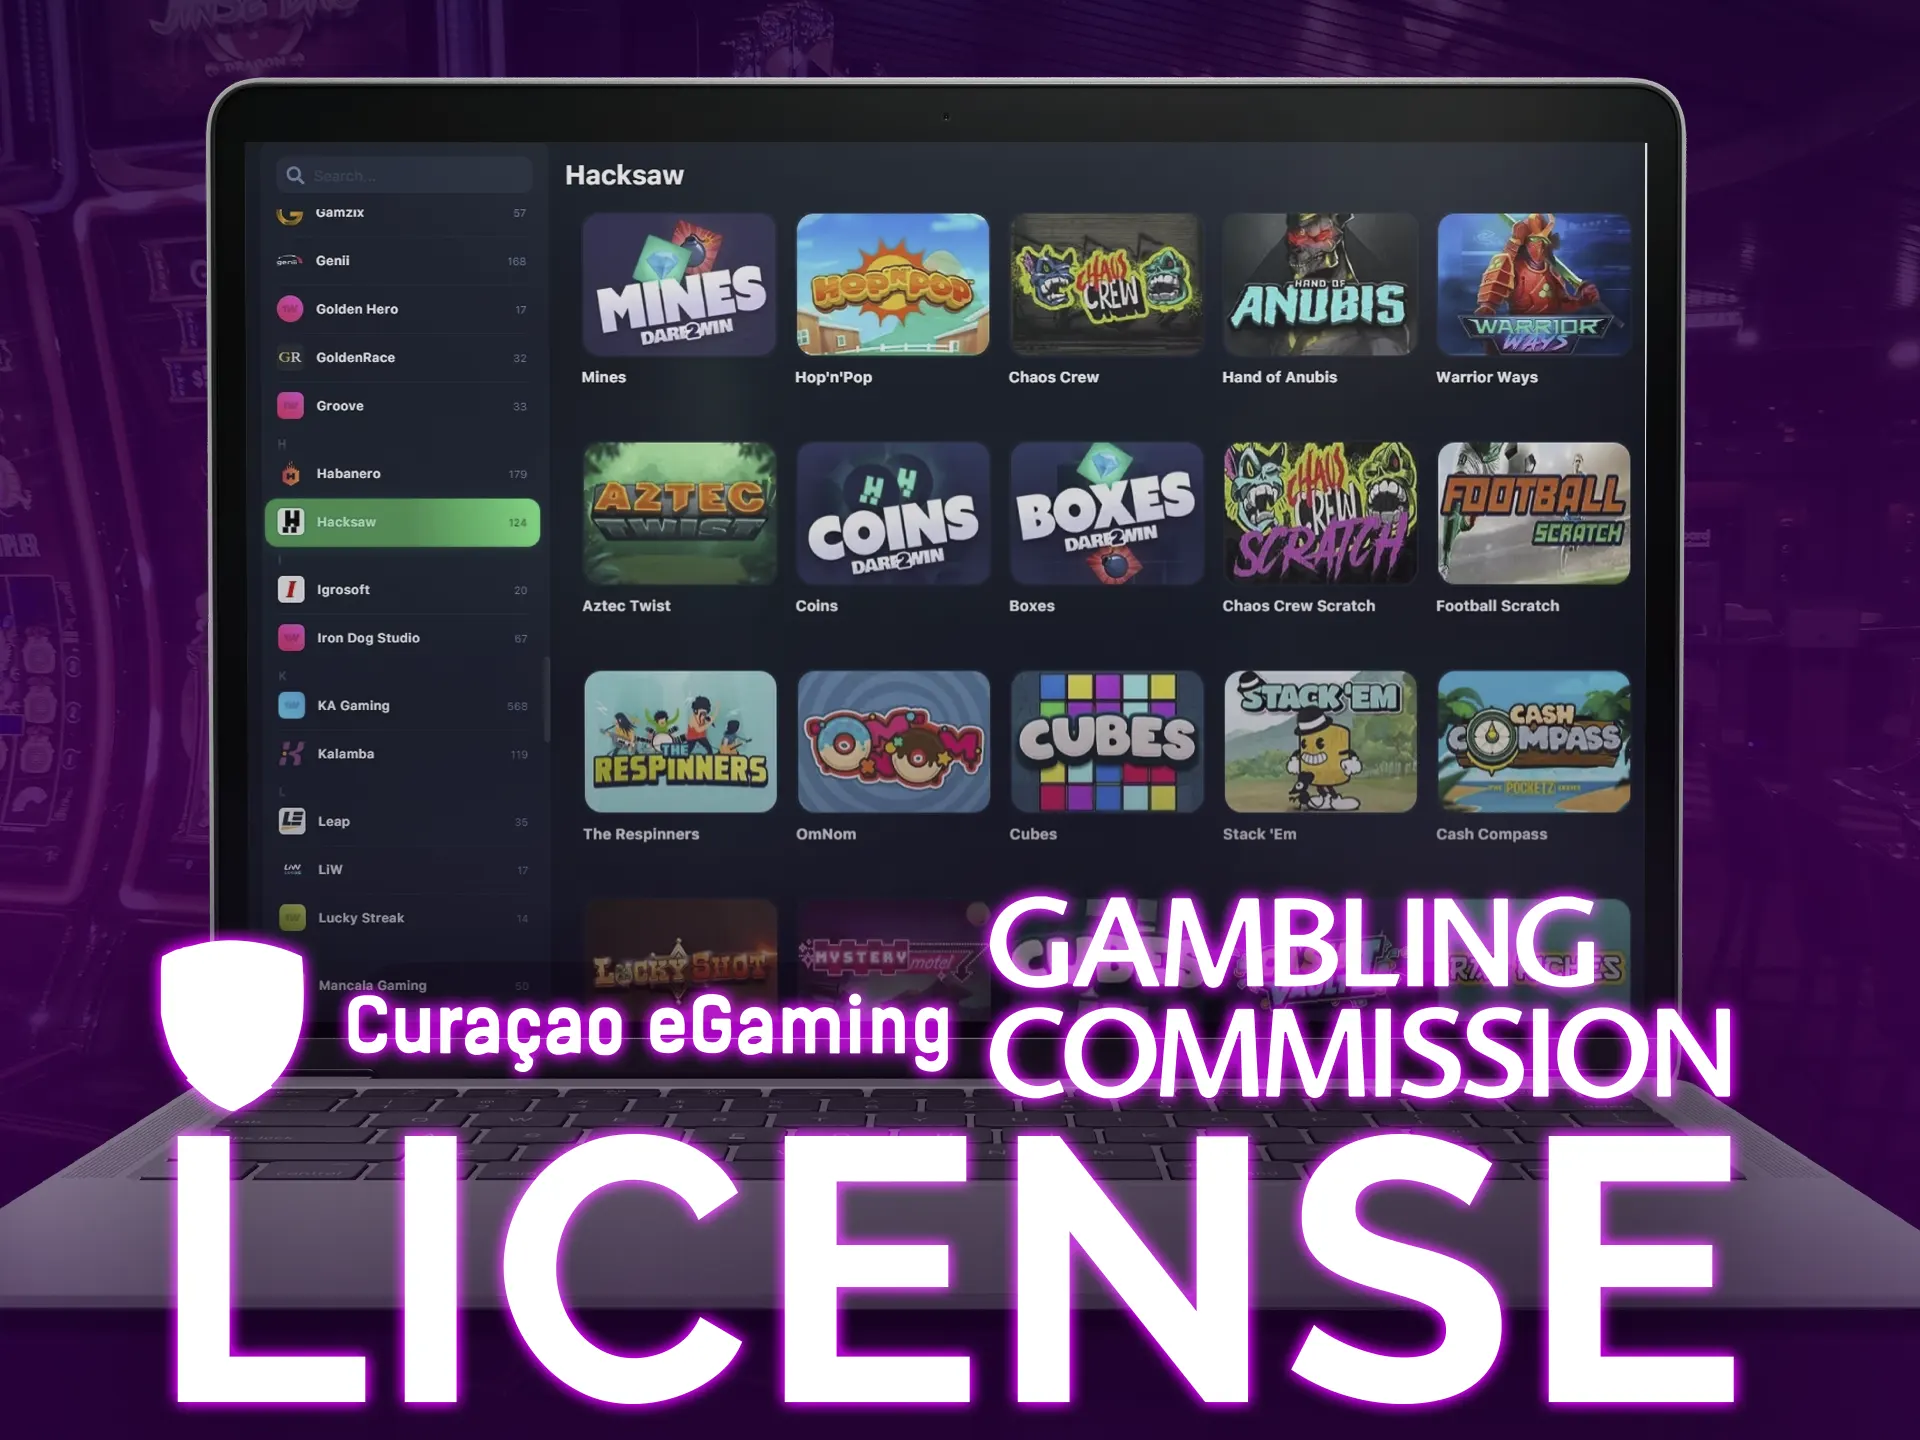 Hacksaw Gaming holds licenses for safe and quality gameplay.